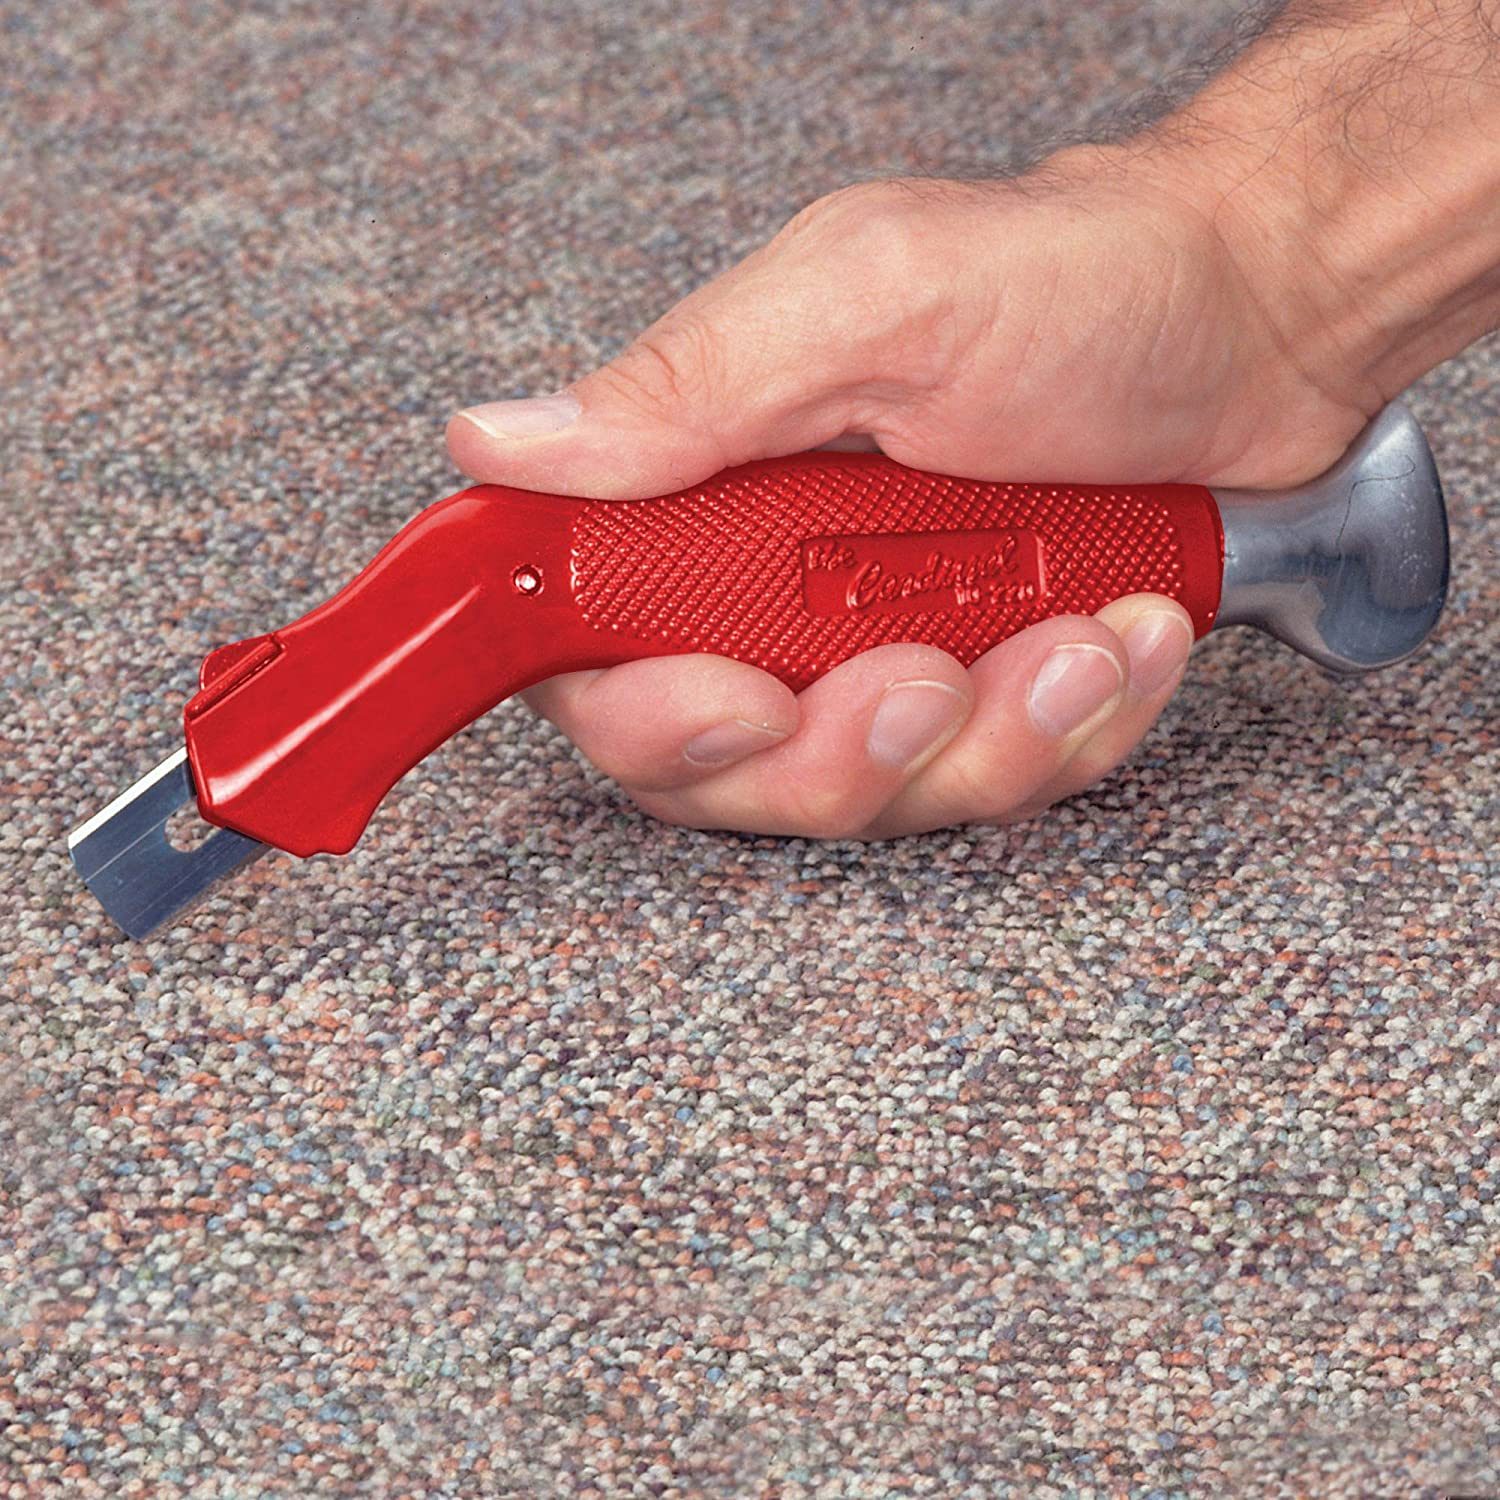 A Complete Carpet Cutting Knife Guide: Everything You Need to Know Before You Buy